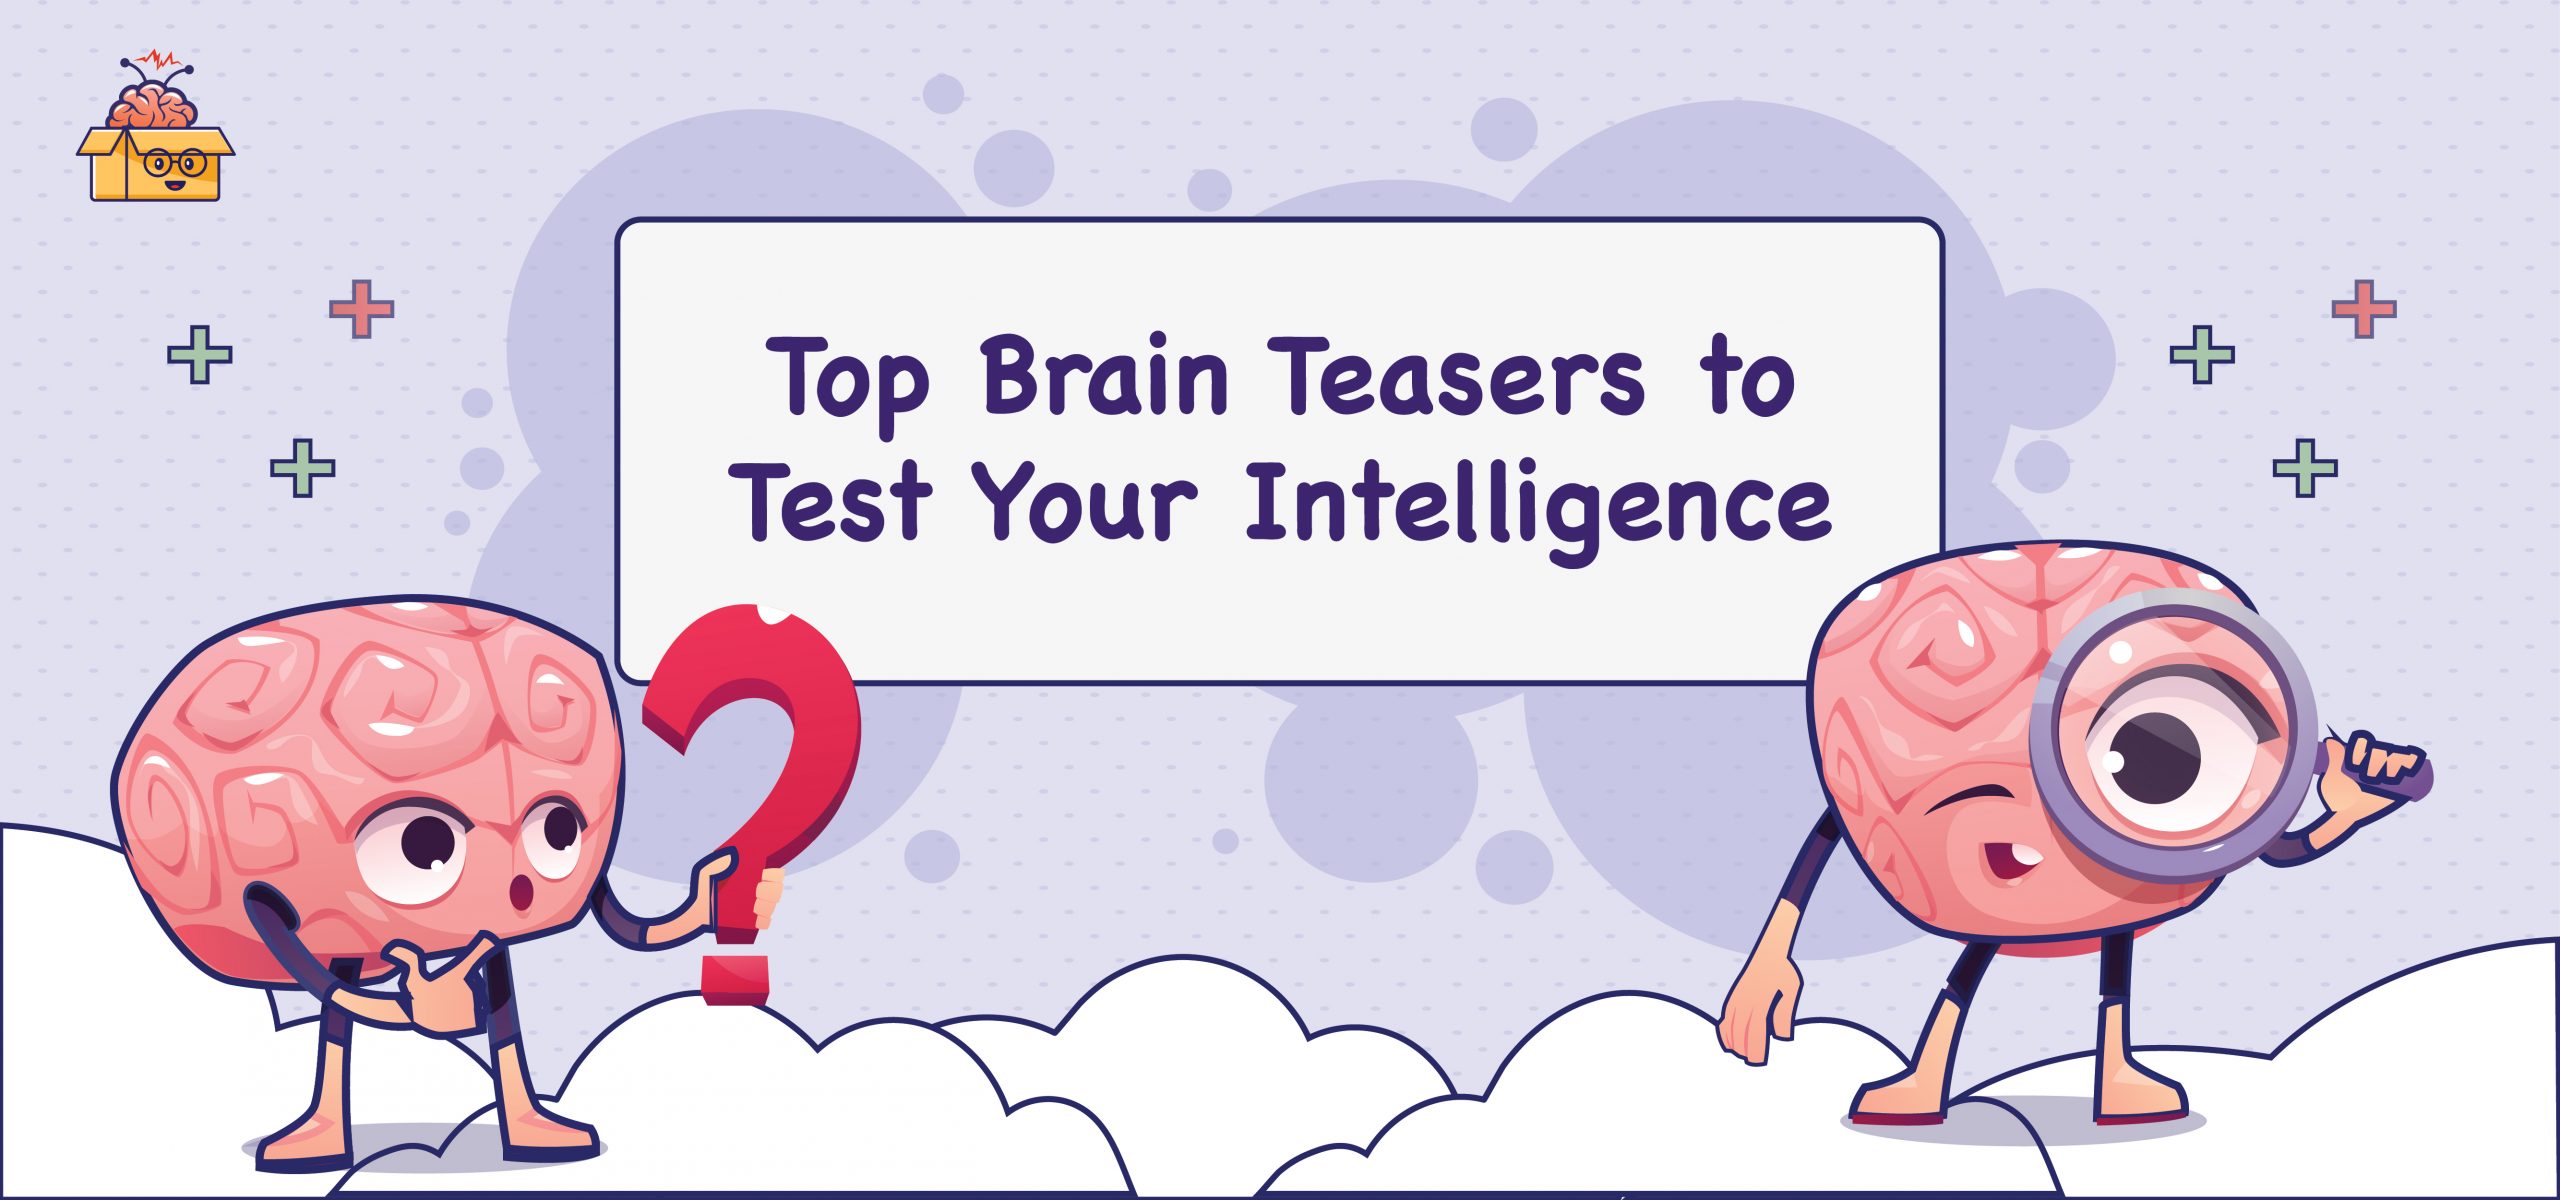 Puzzle ,Brain Teaser,Riddle - Test 4 Exams  Picture puzzles, Maths  puzzles, Brain teasers riddles